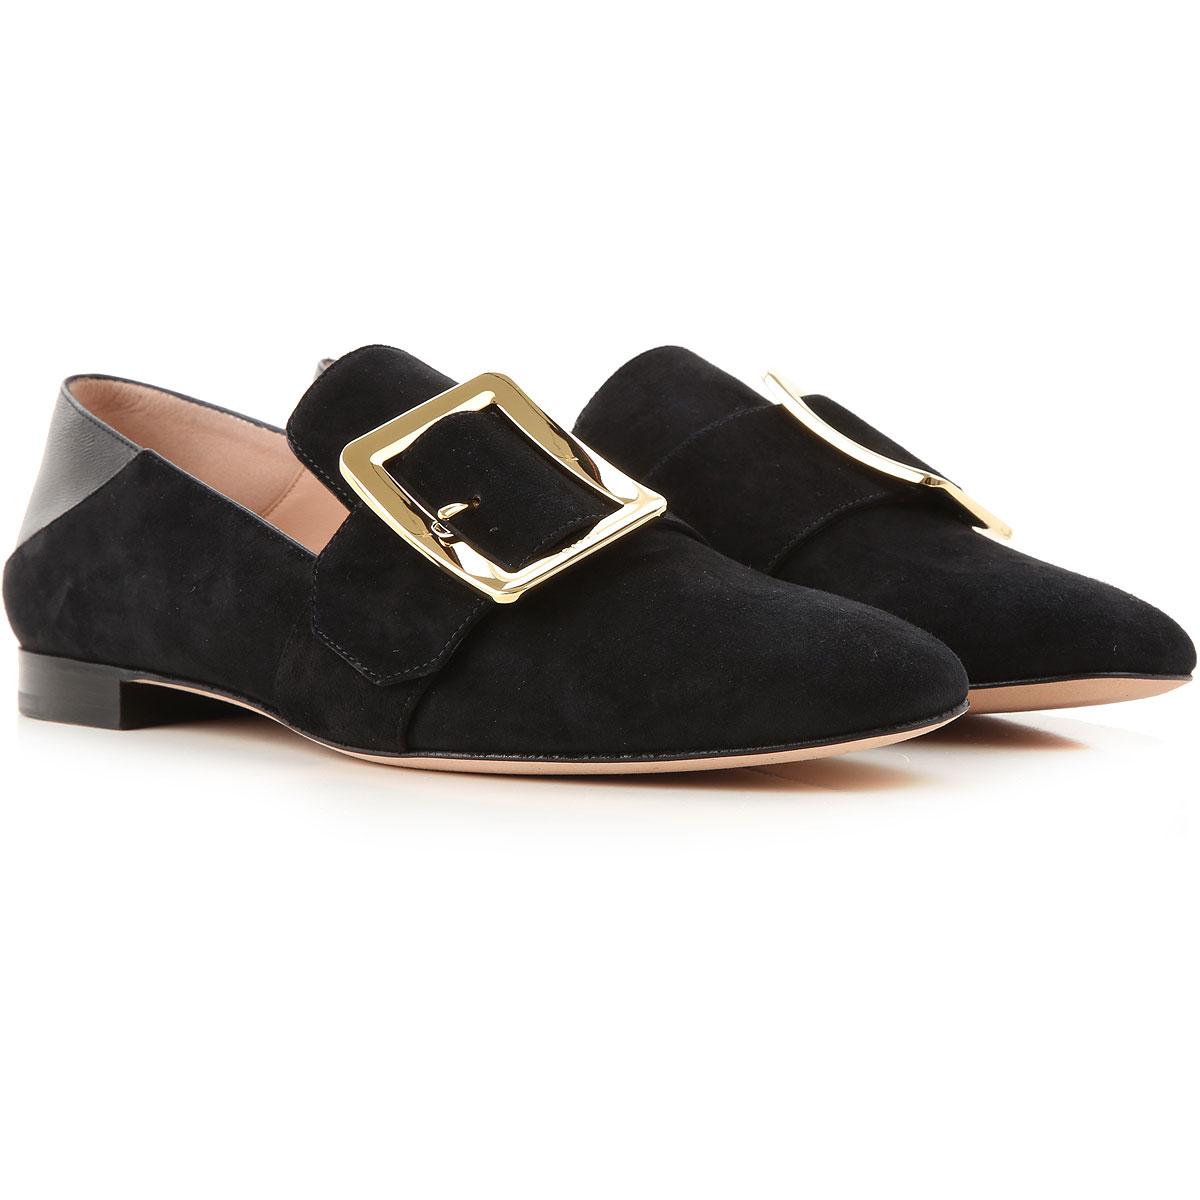 Bally Leather Shoes For Women in Black - Lyst